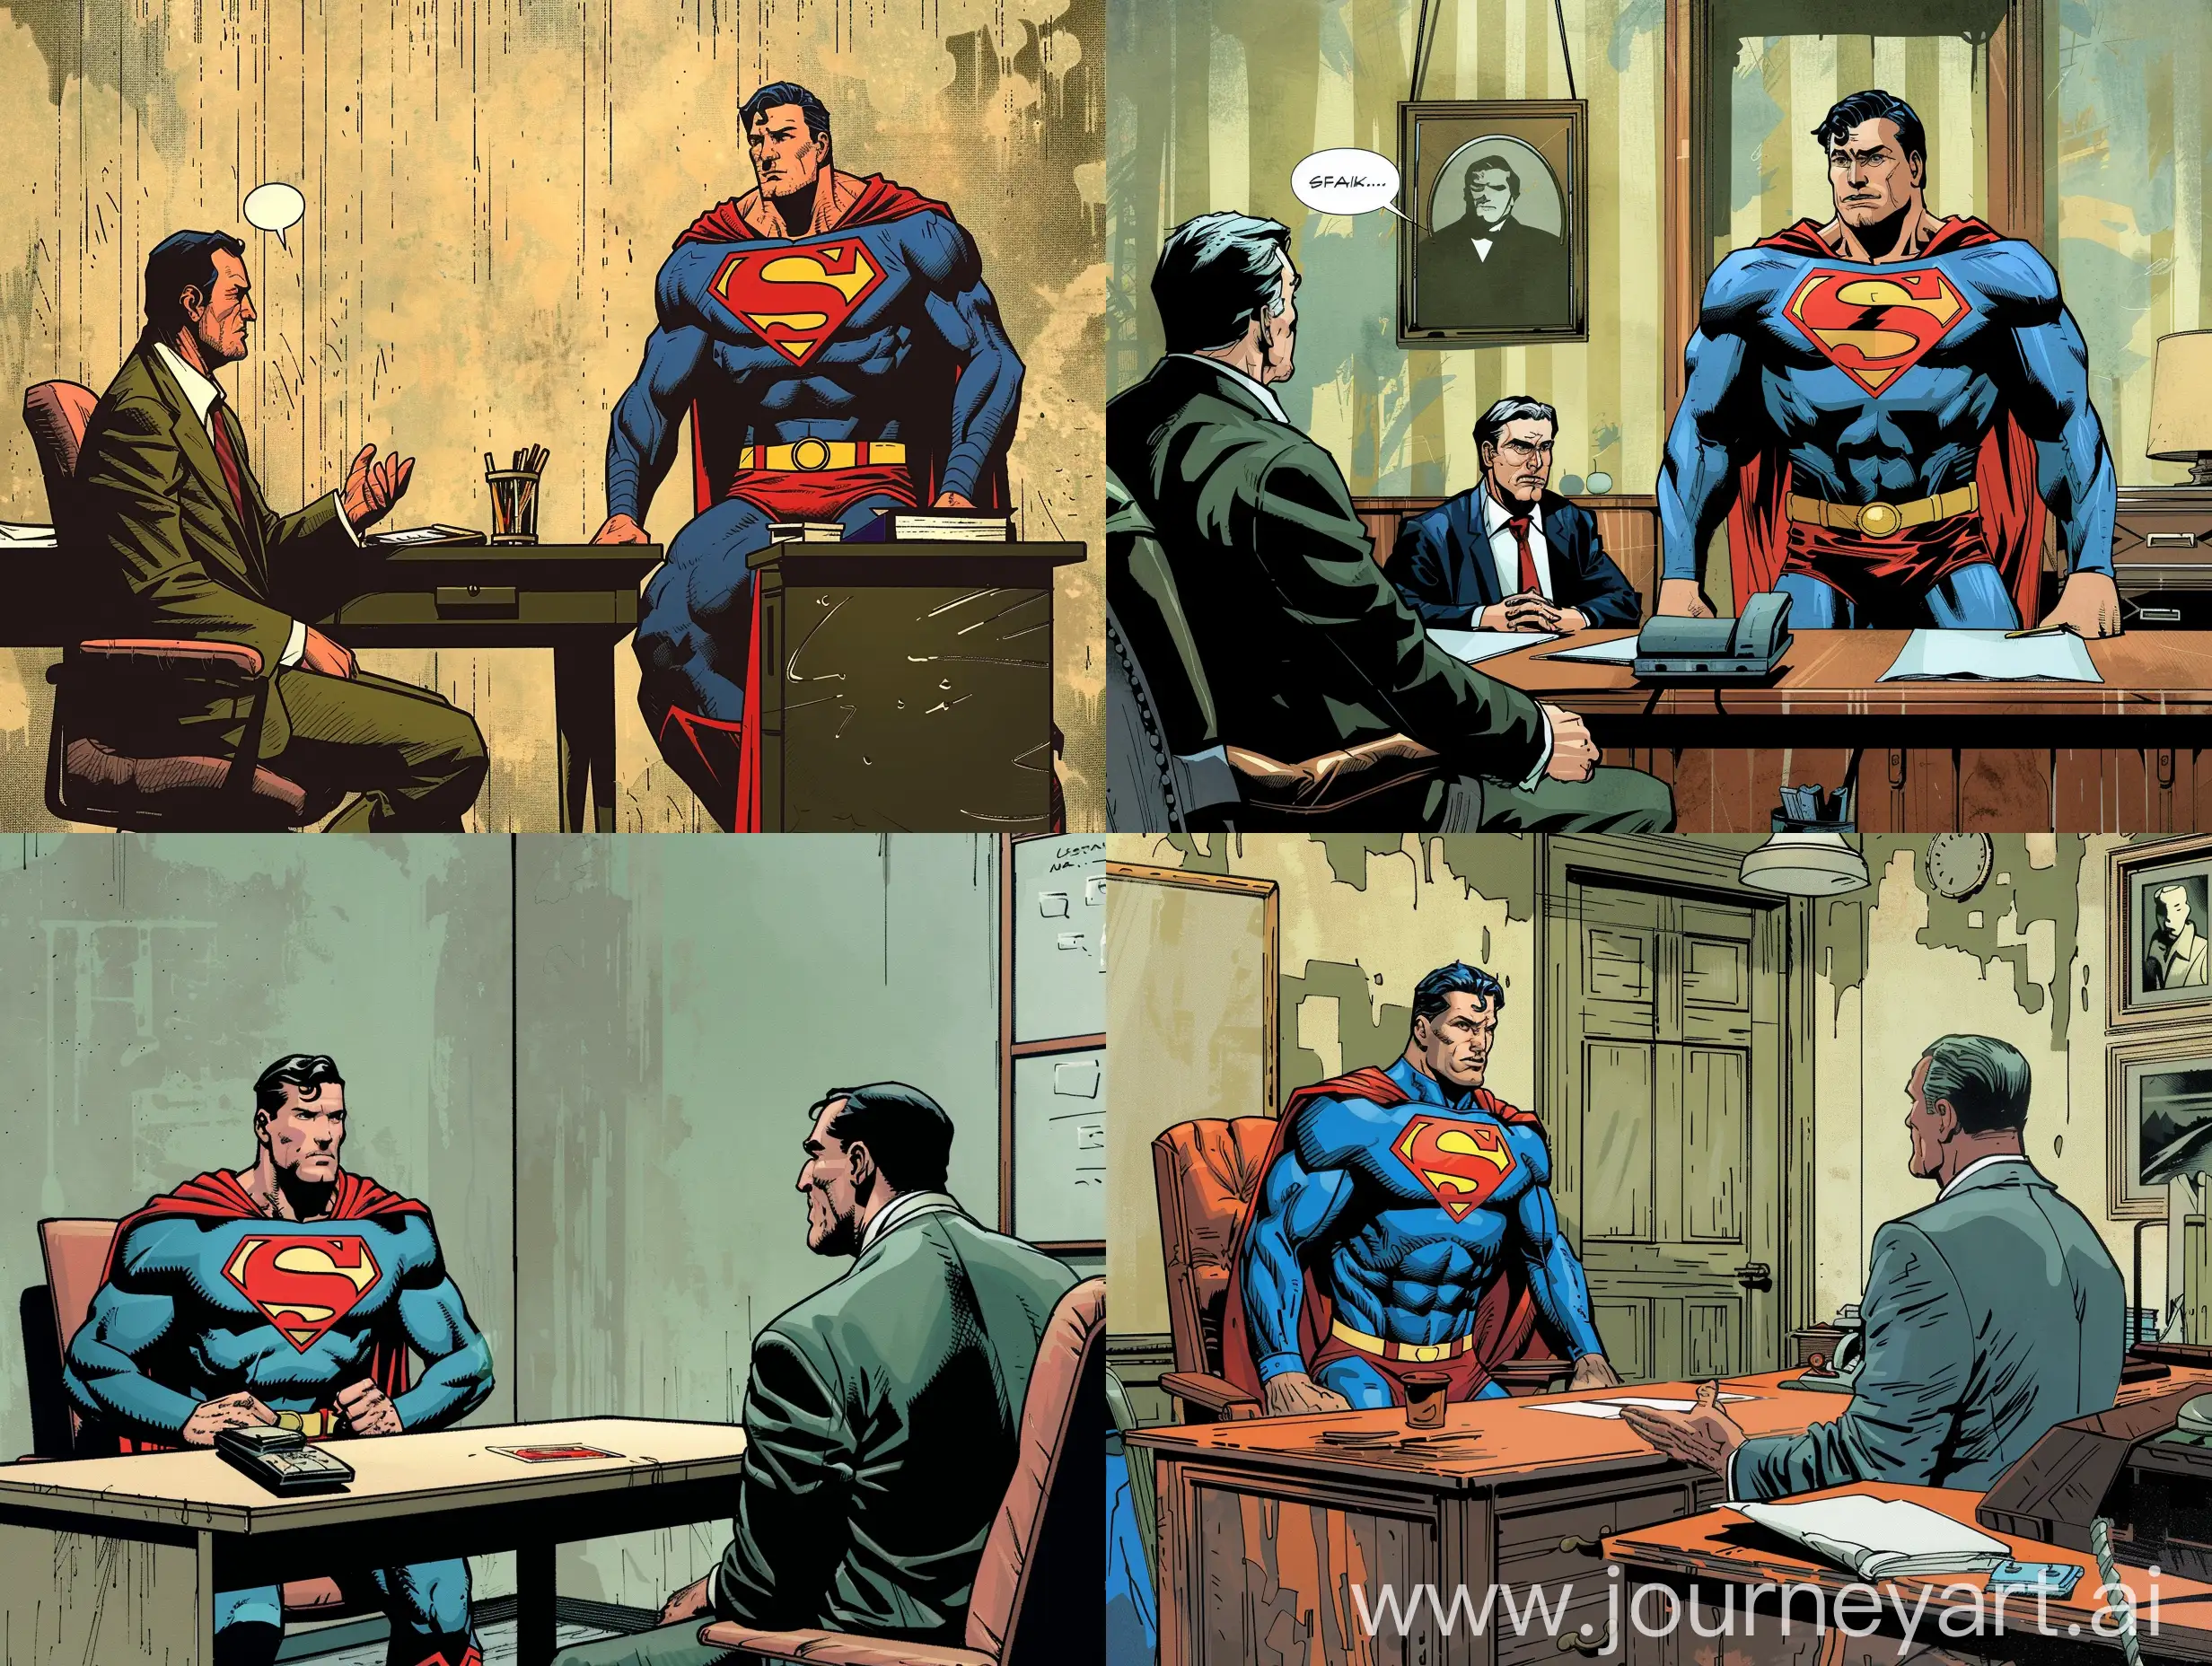 Superman-in-Office-Casual-Conversation-with-Man-in-Suit